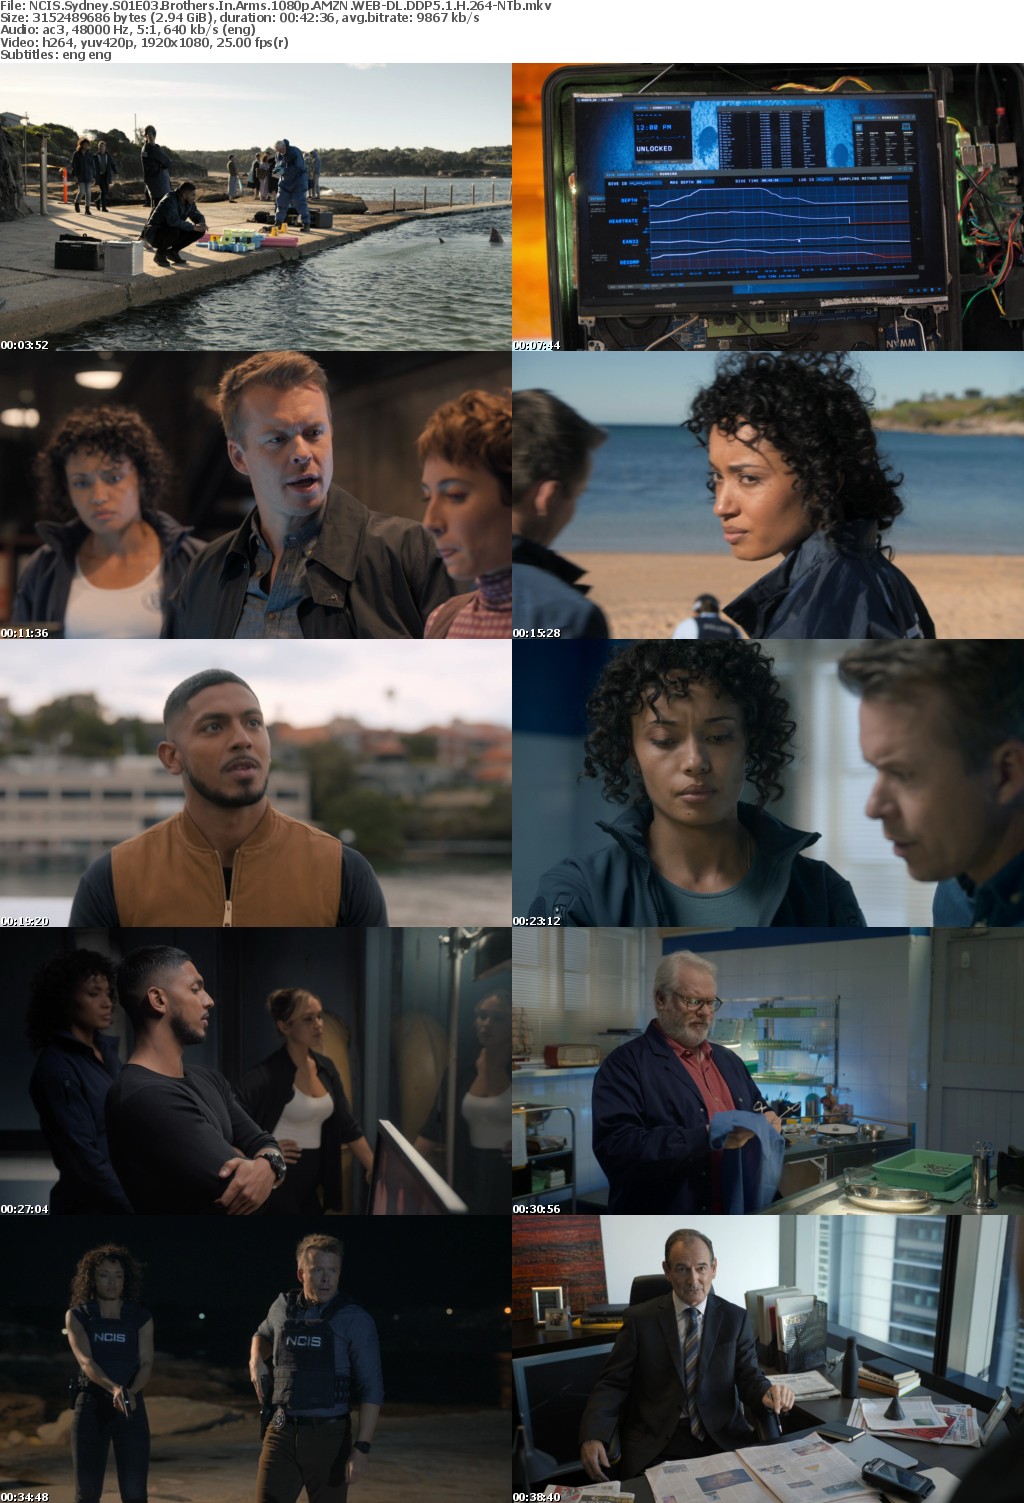 NCIS Sydney S01E03 Brothers In Arms 1080p AMZN WEB-DL DDP5 1 H 264-NTb